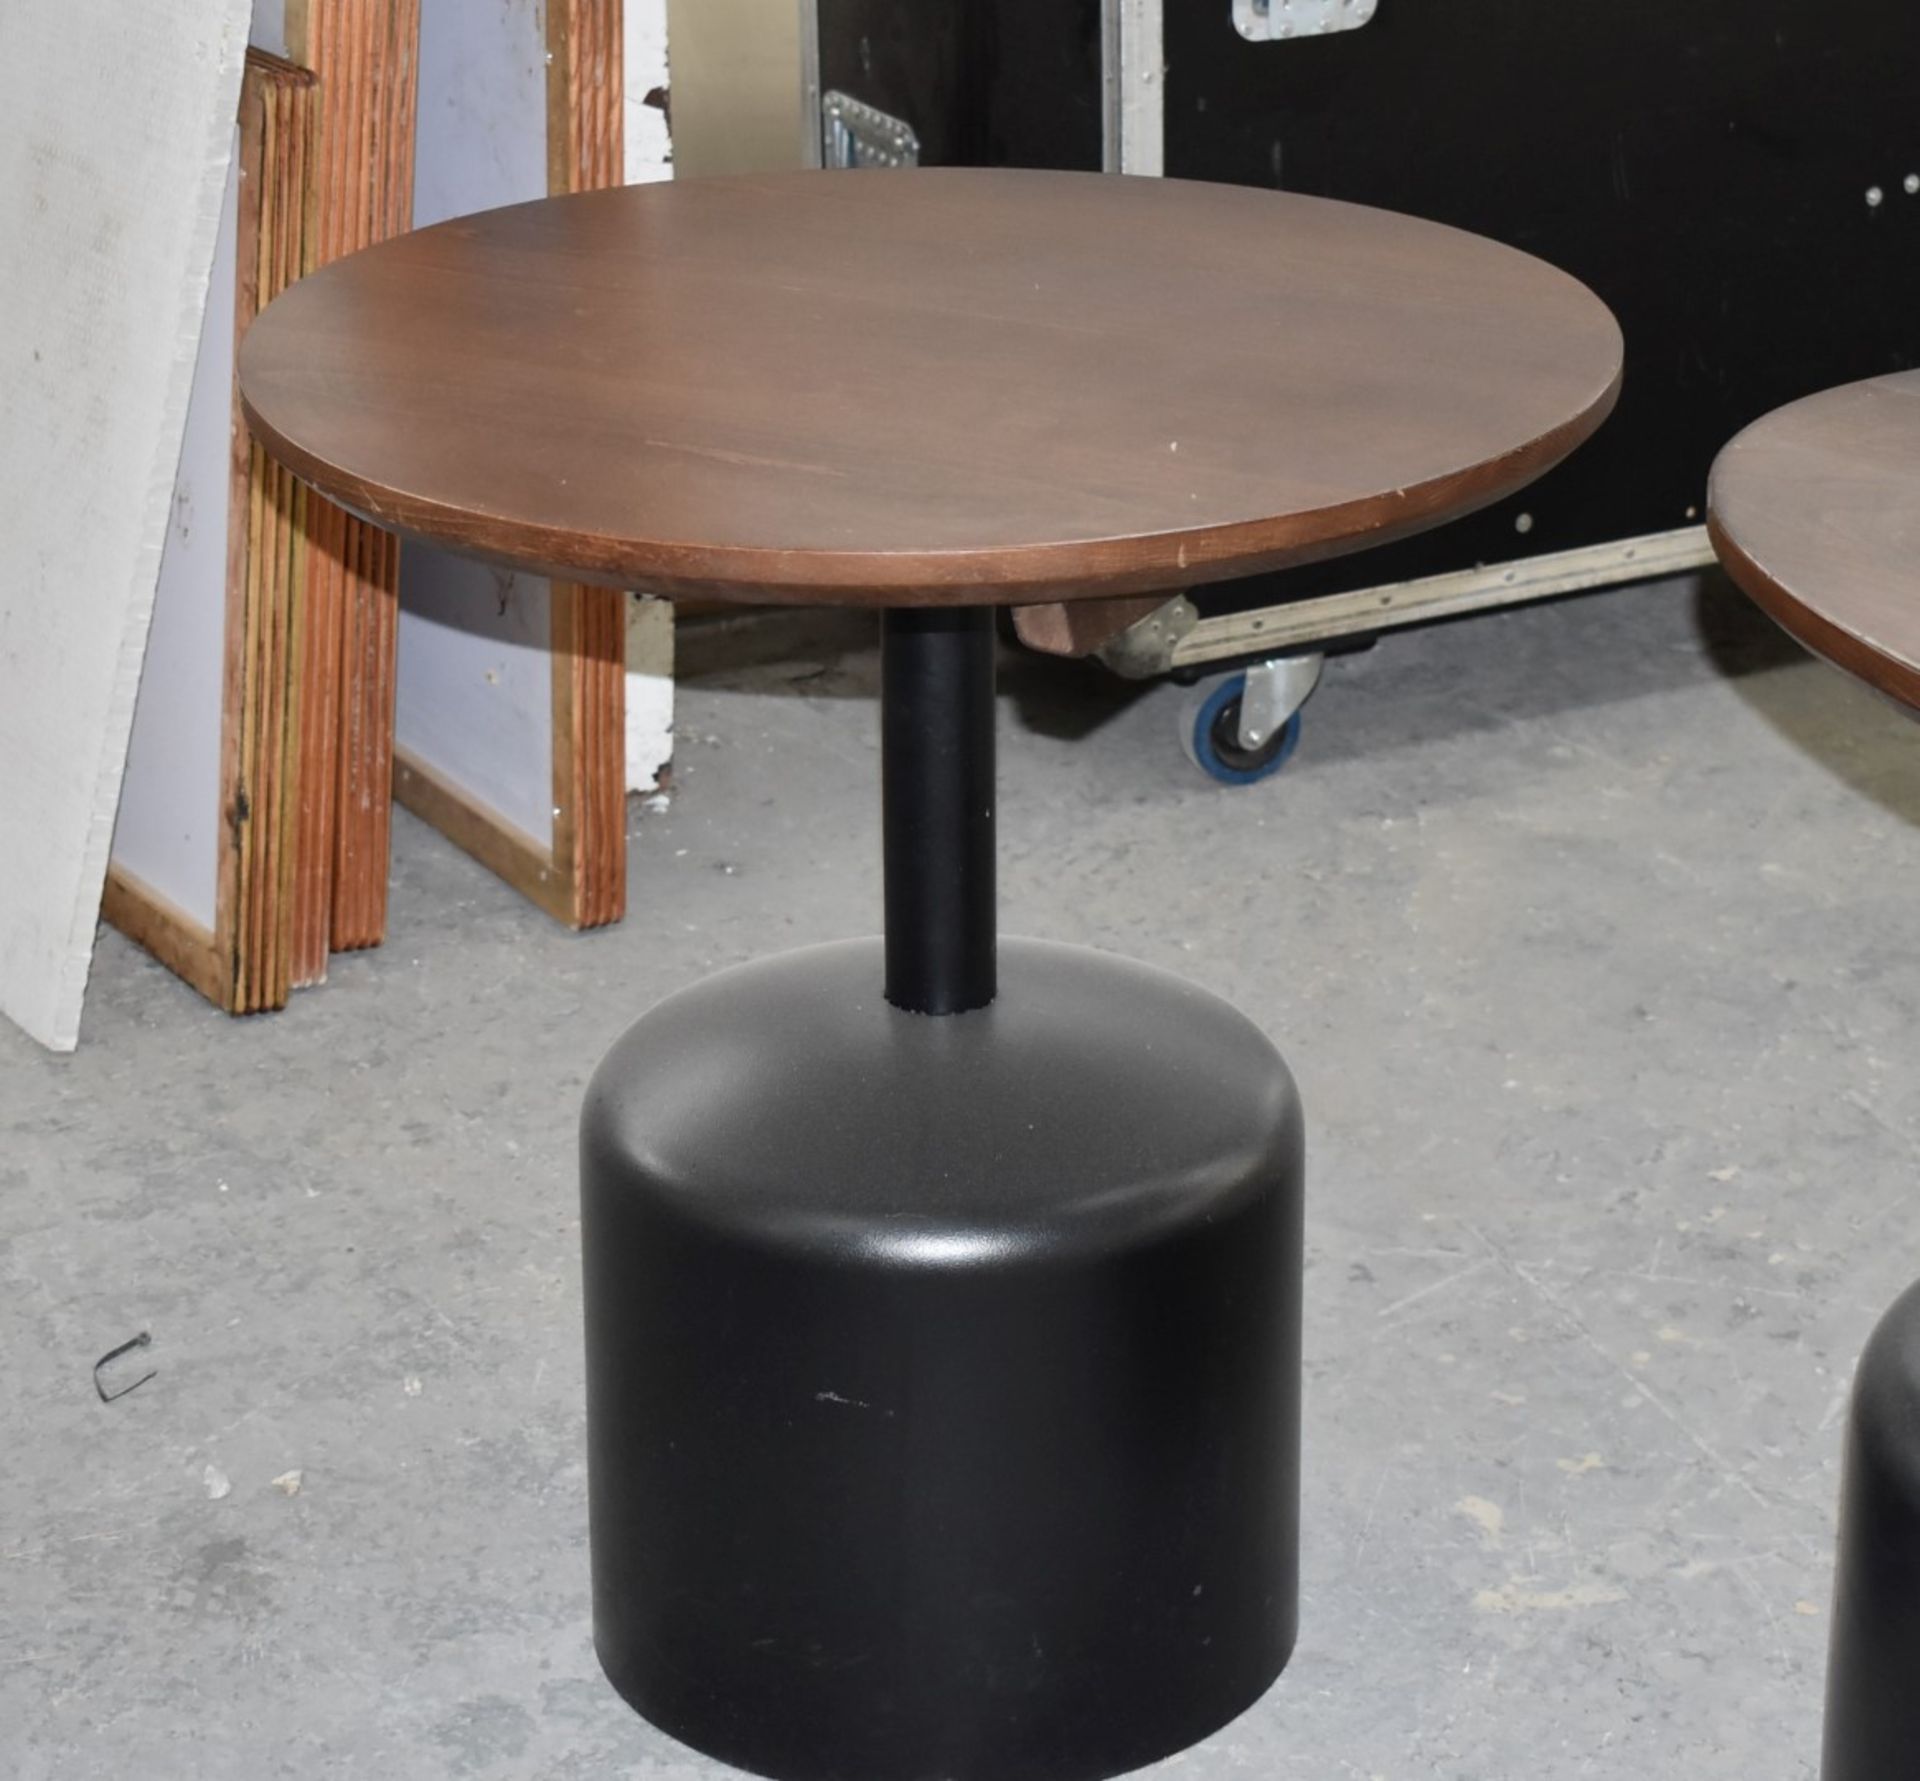 14 x Commercial Restaurant Tables Features Large Black Pedestals and Dark Stained Wooden Tops - Image 5 of 23